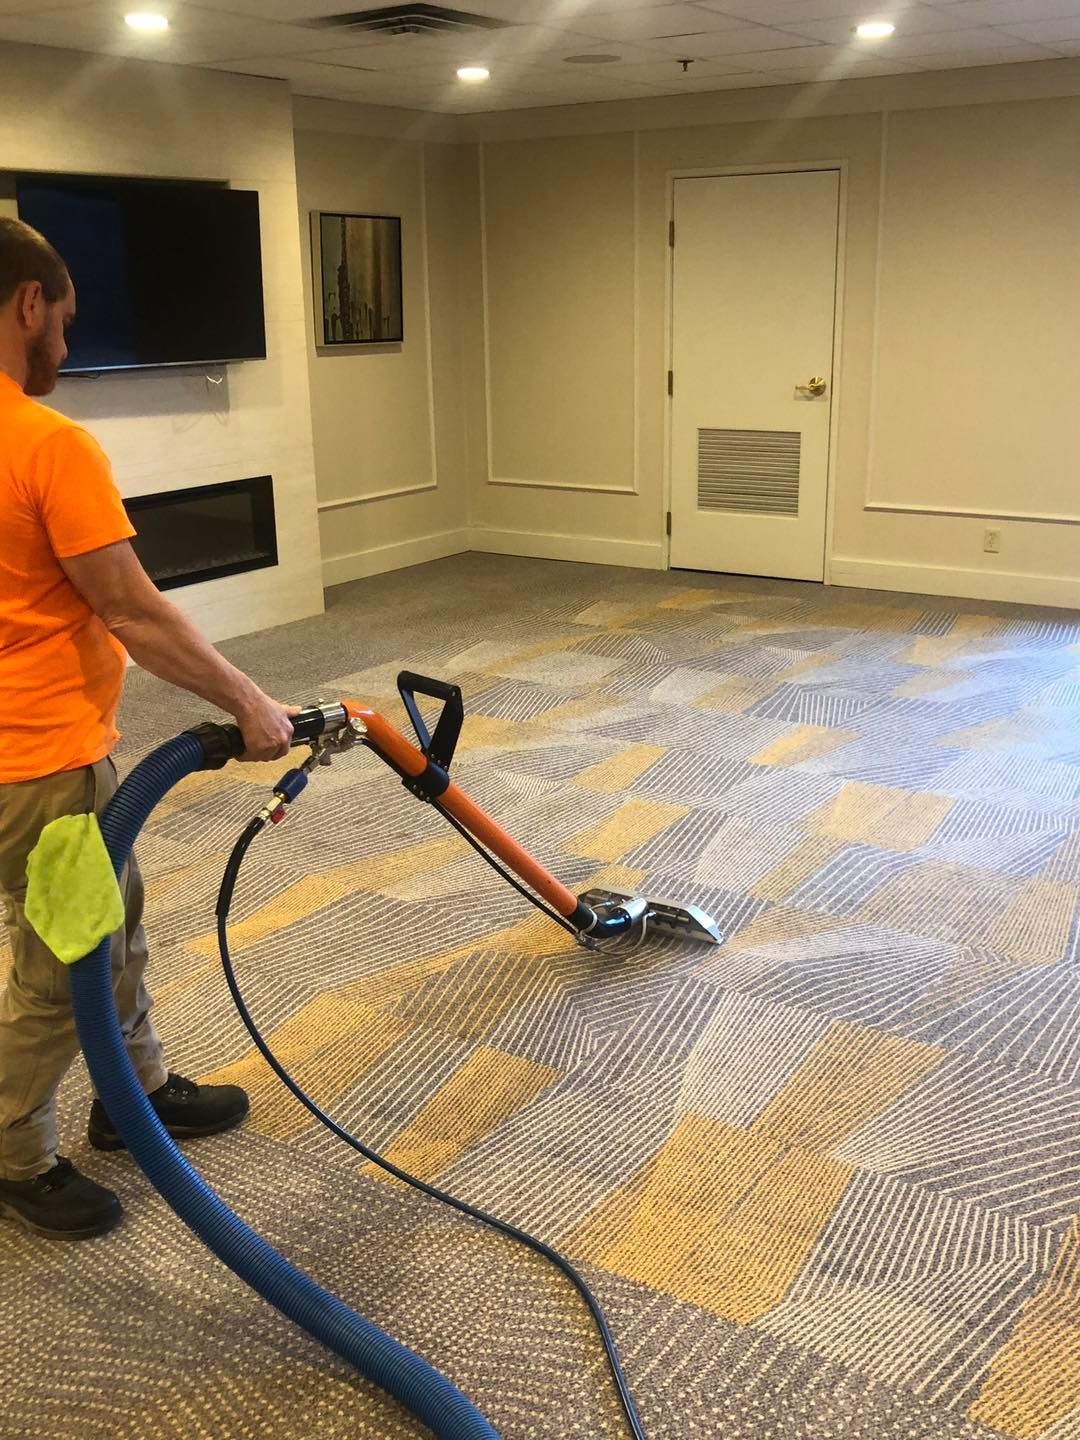 A man is cleaning a carpet with a vacuum cleaner